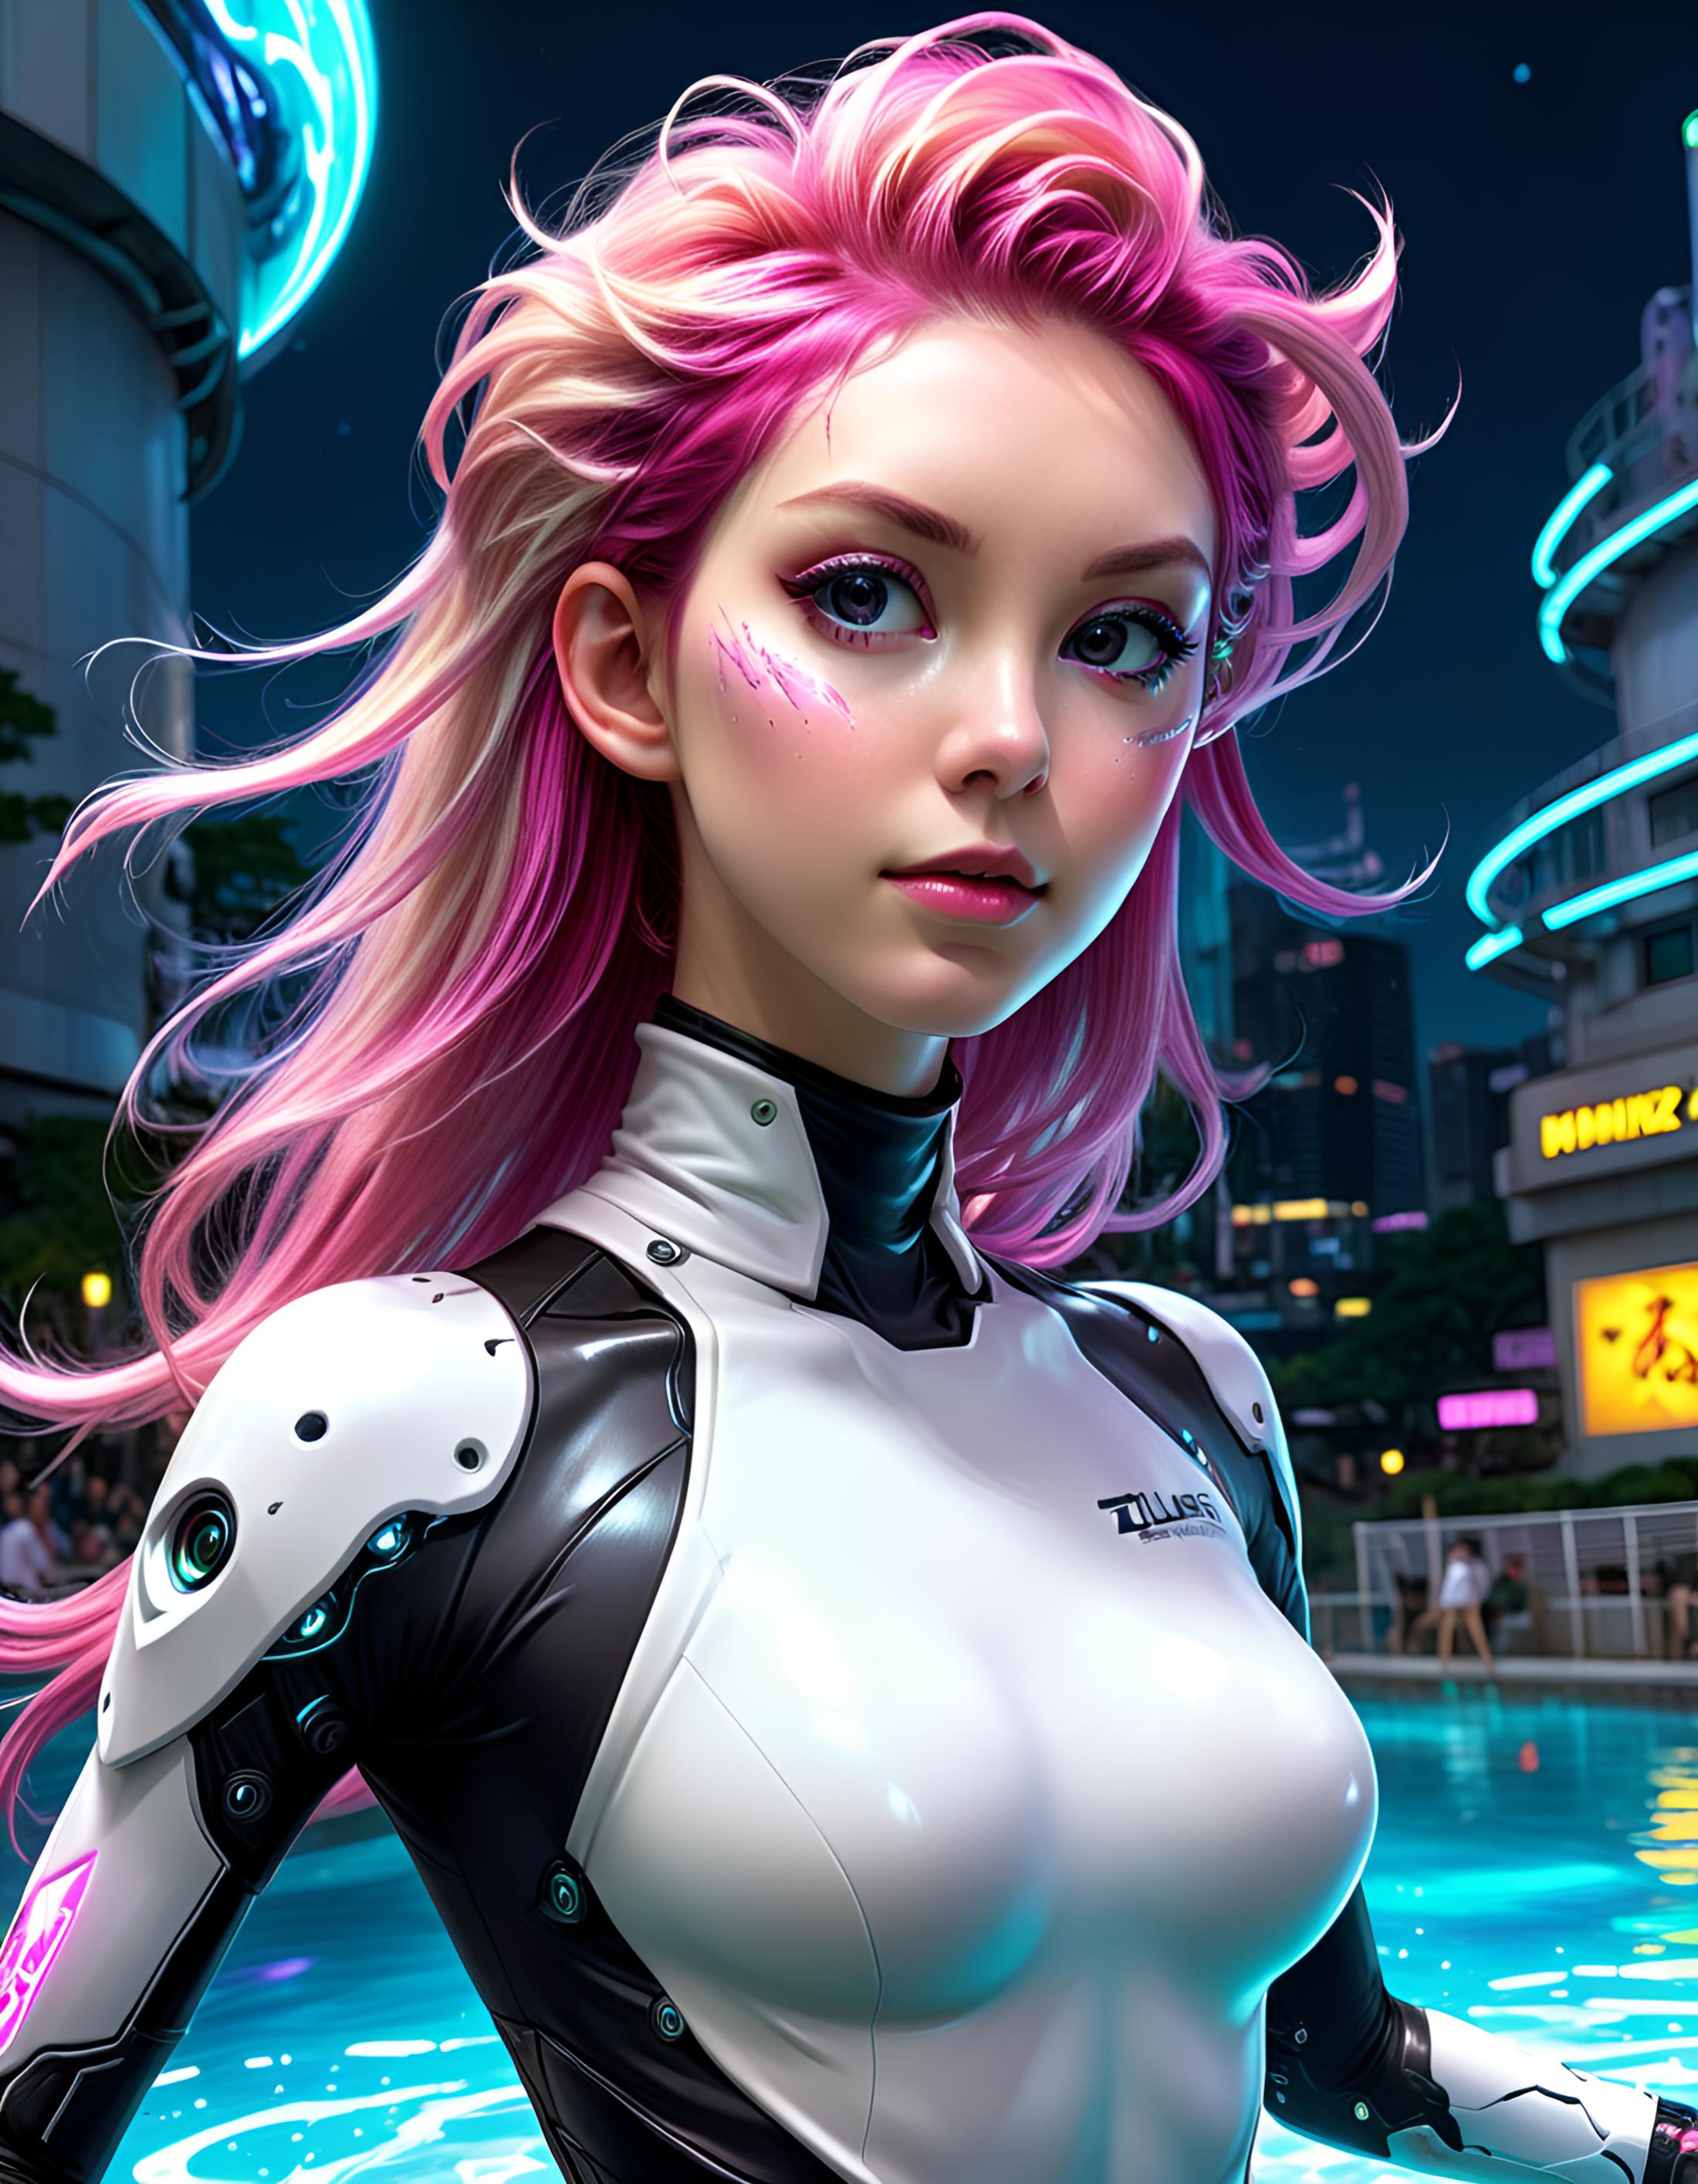 Pink-haired girl in futuristic armor posing in front of a blue pool.